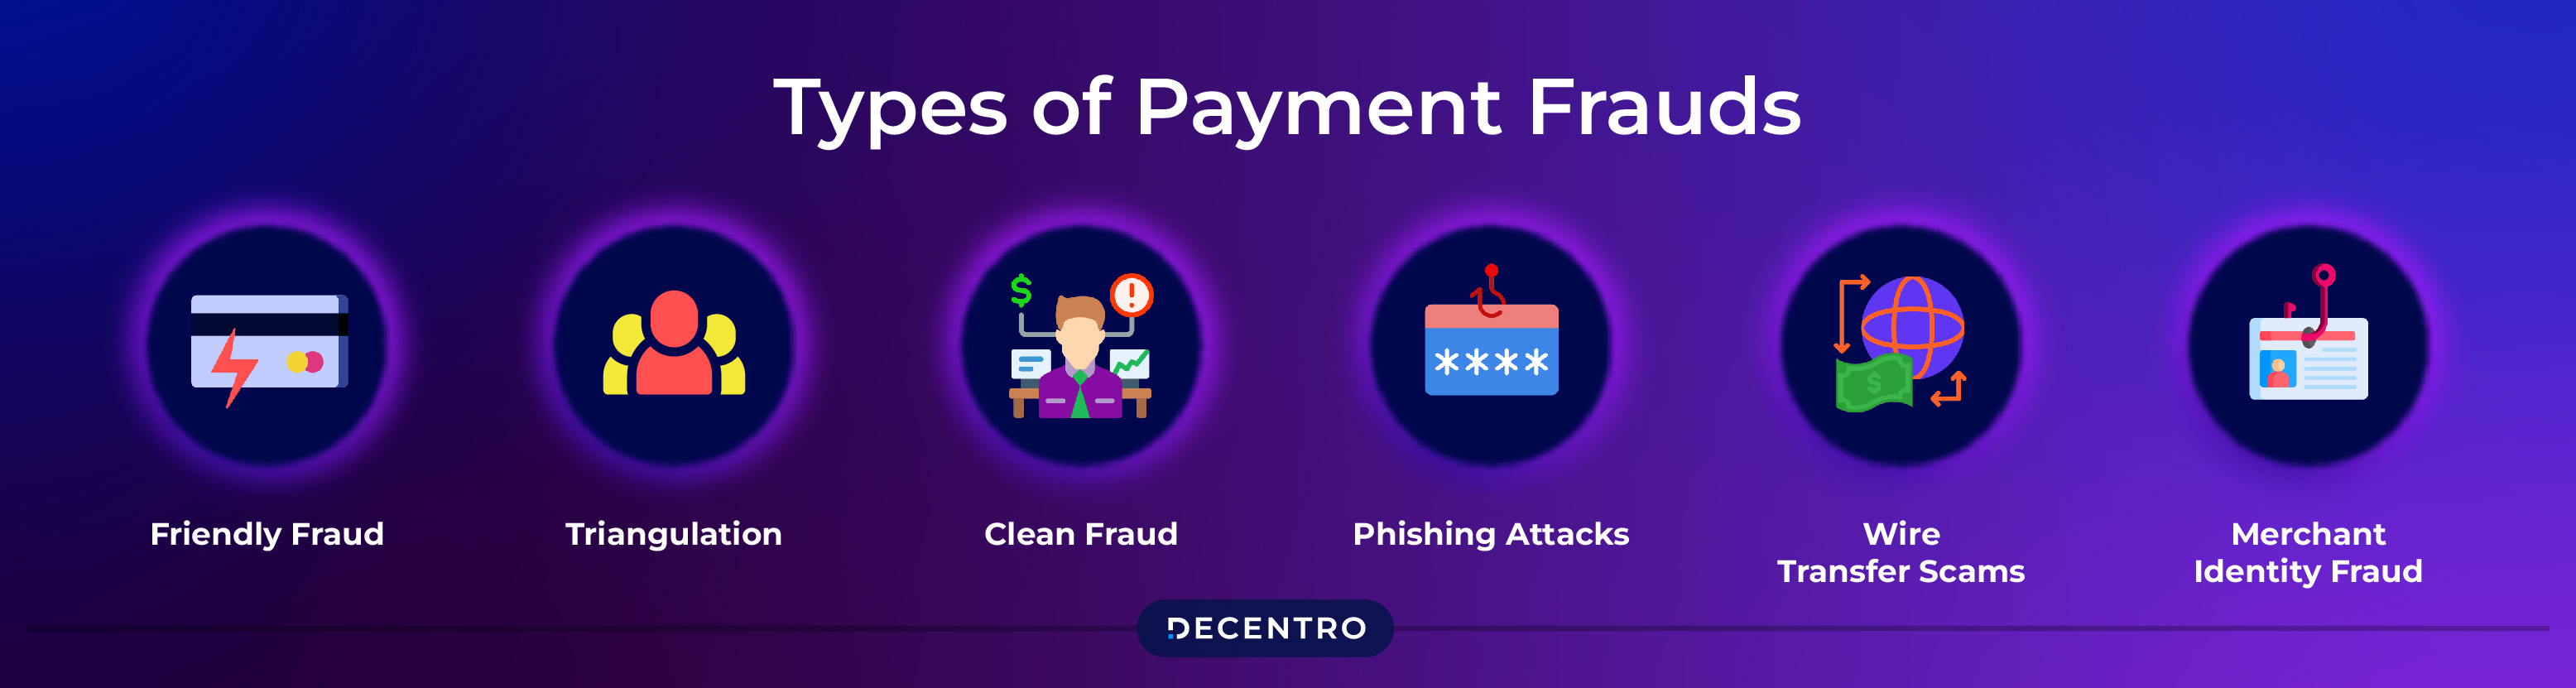 What are the Types of Payment Fraud?